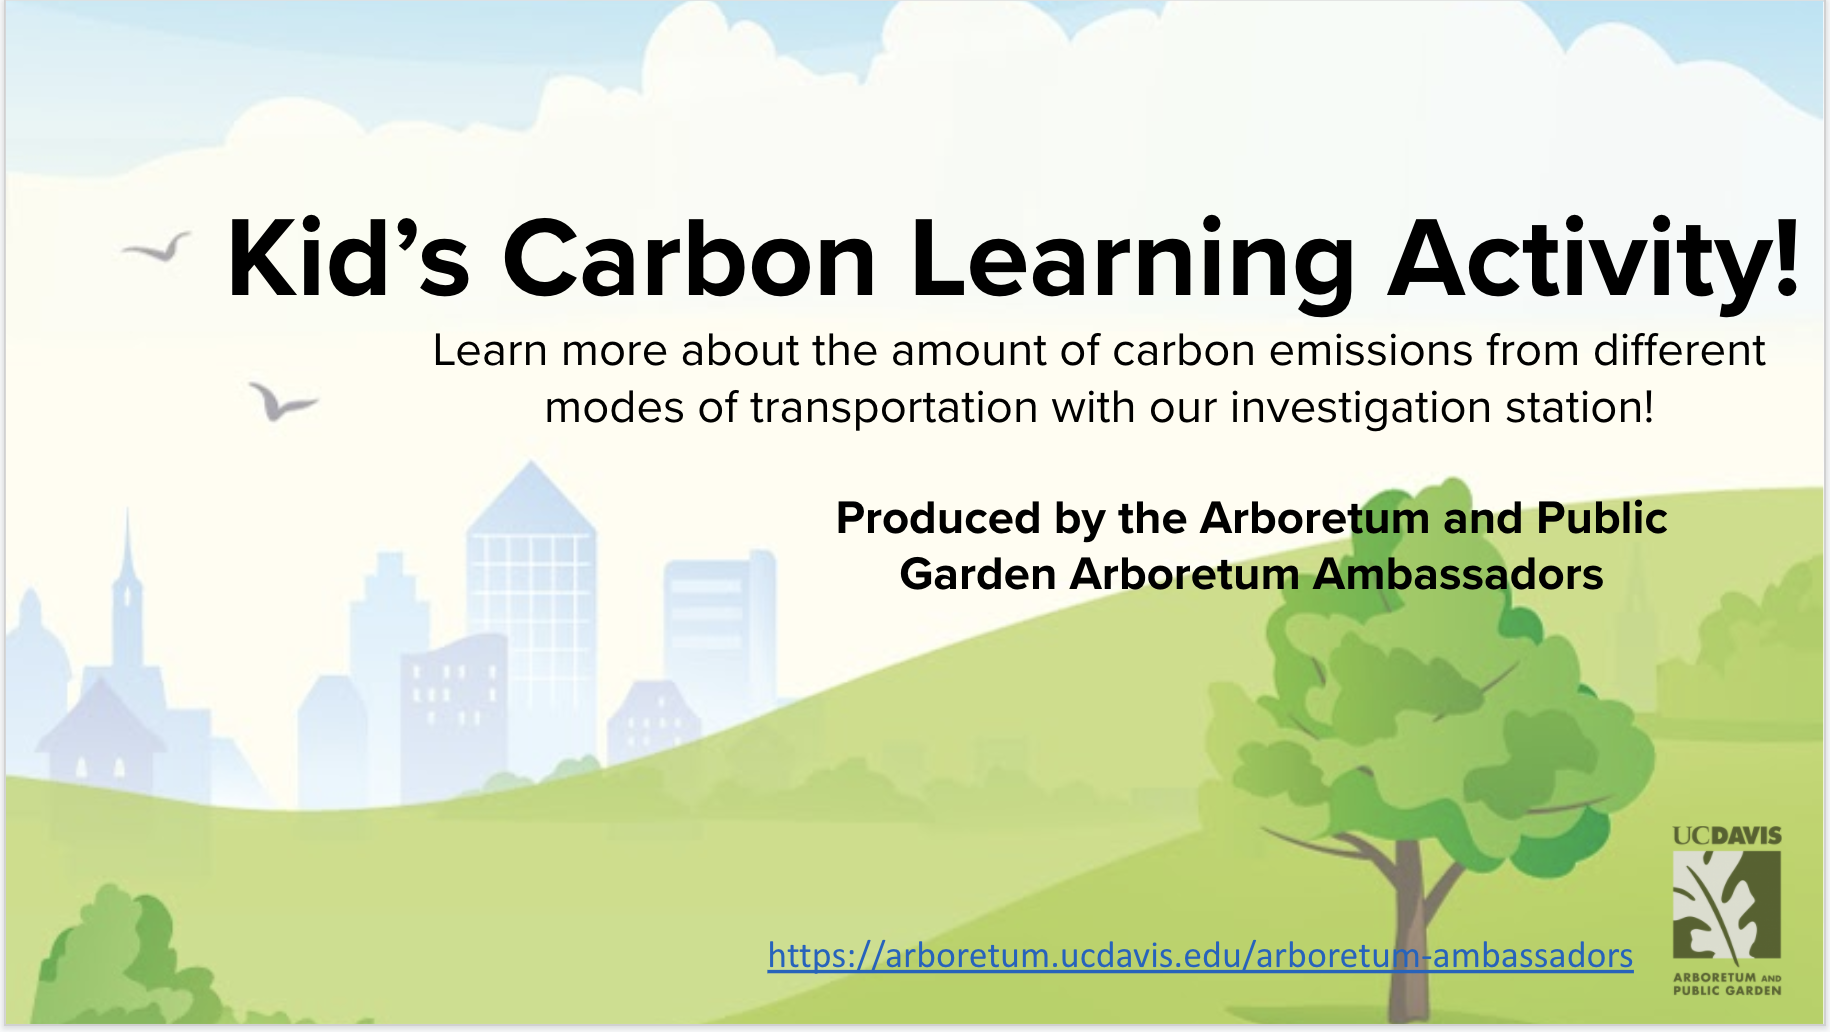 Title page image for the Carbon Learning Activity, with green background with trees and buildings